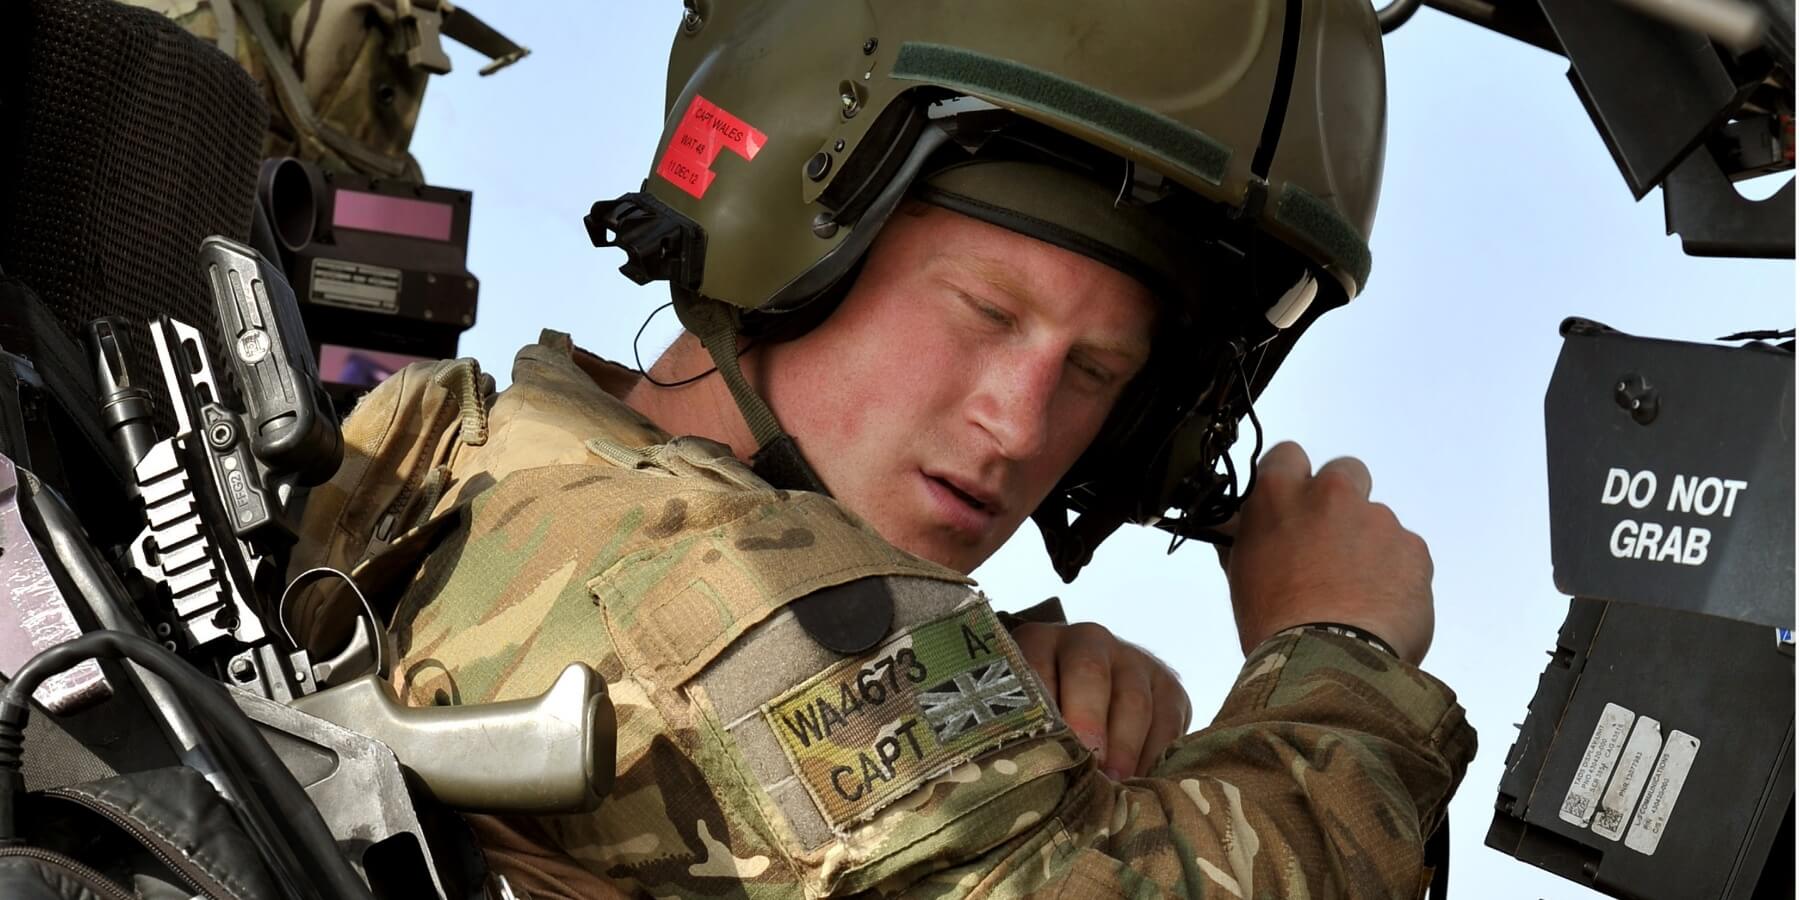 Prince Harry photographed sitting in the cockpit of an Apache Helicopter